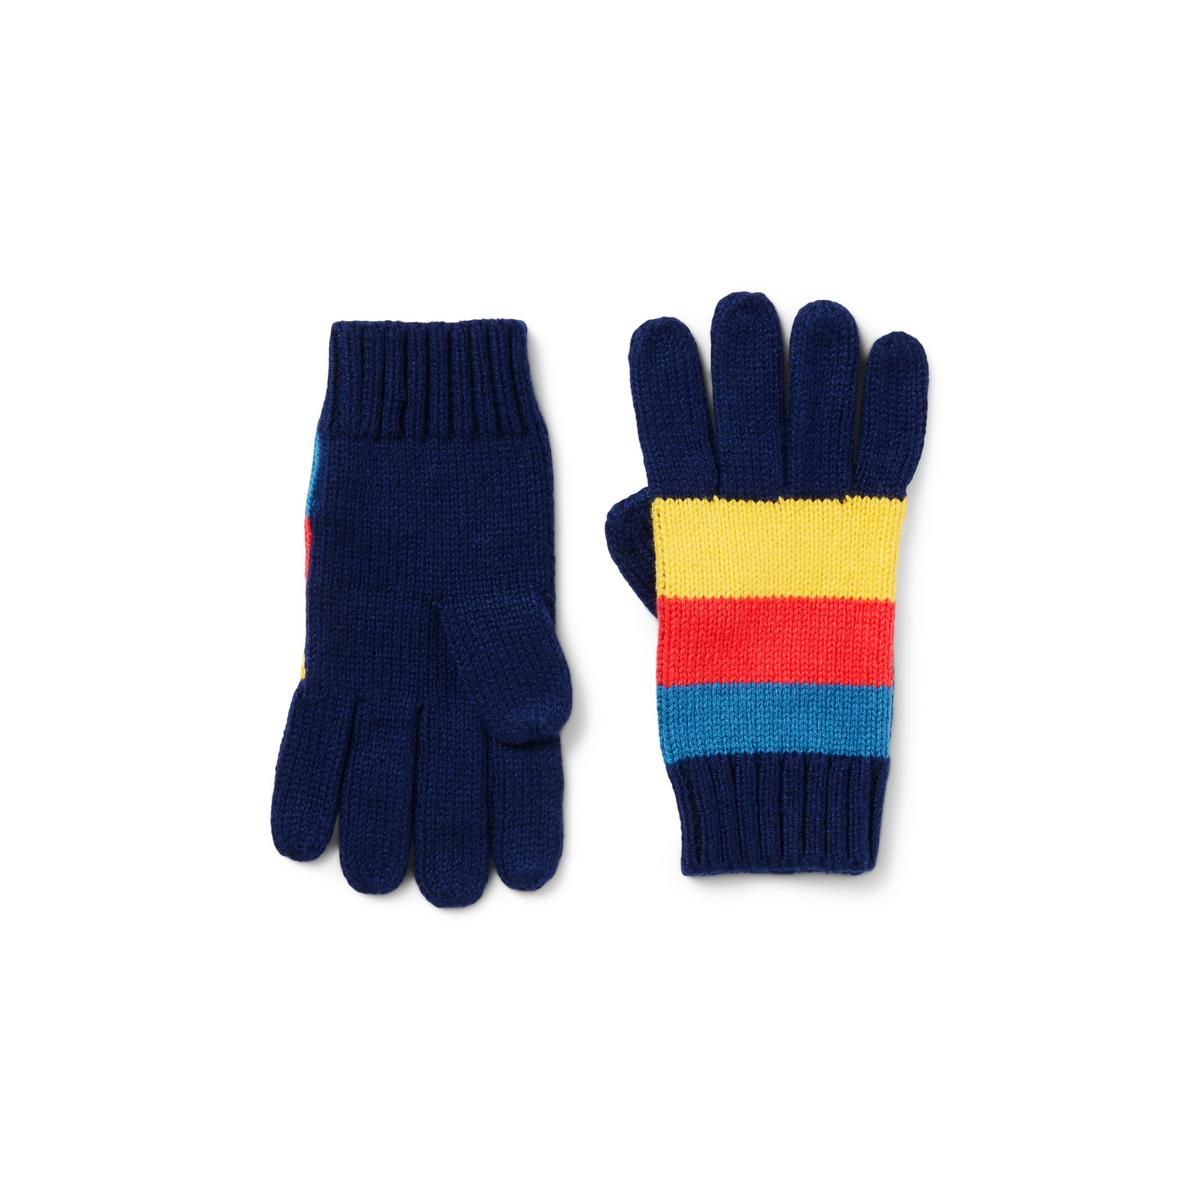 Striped Gloves Or Mittens | Janie and Jack